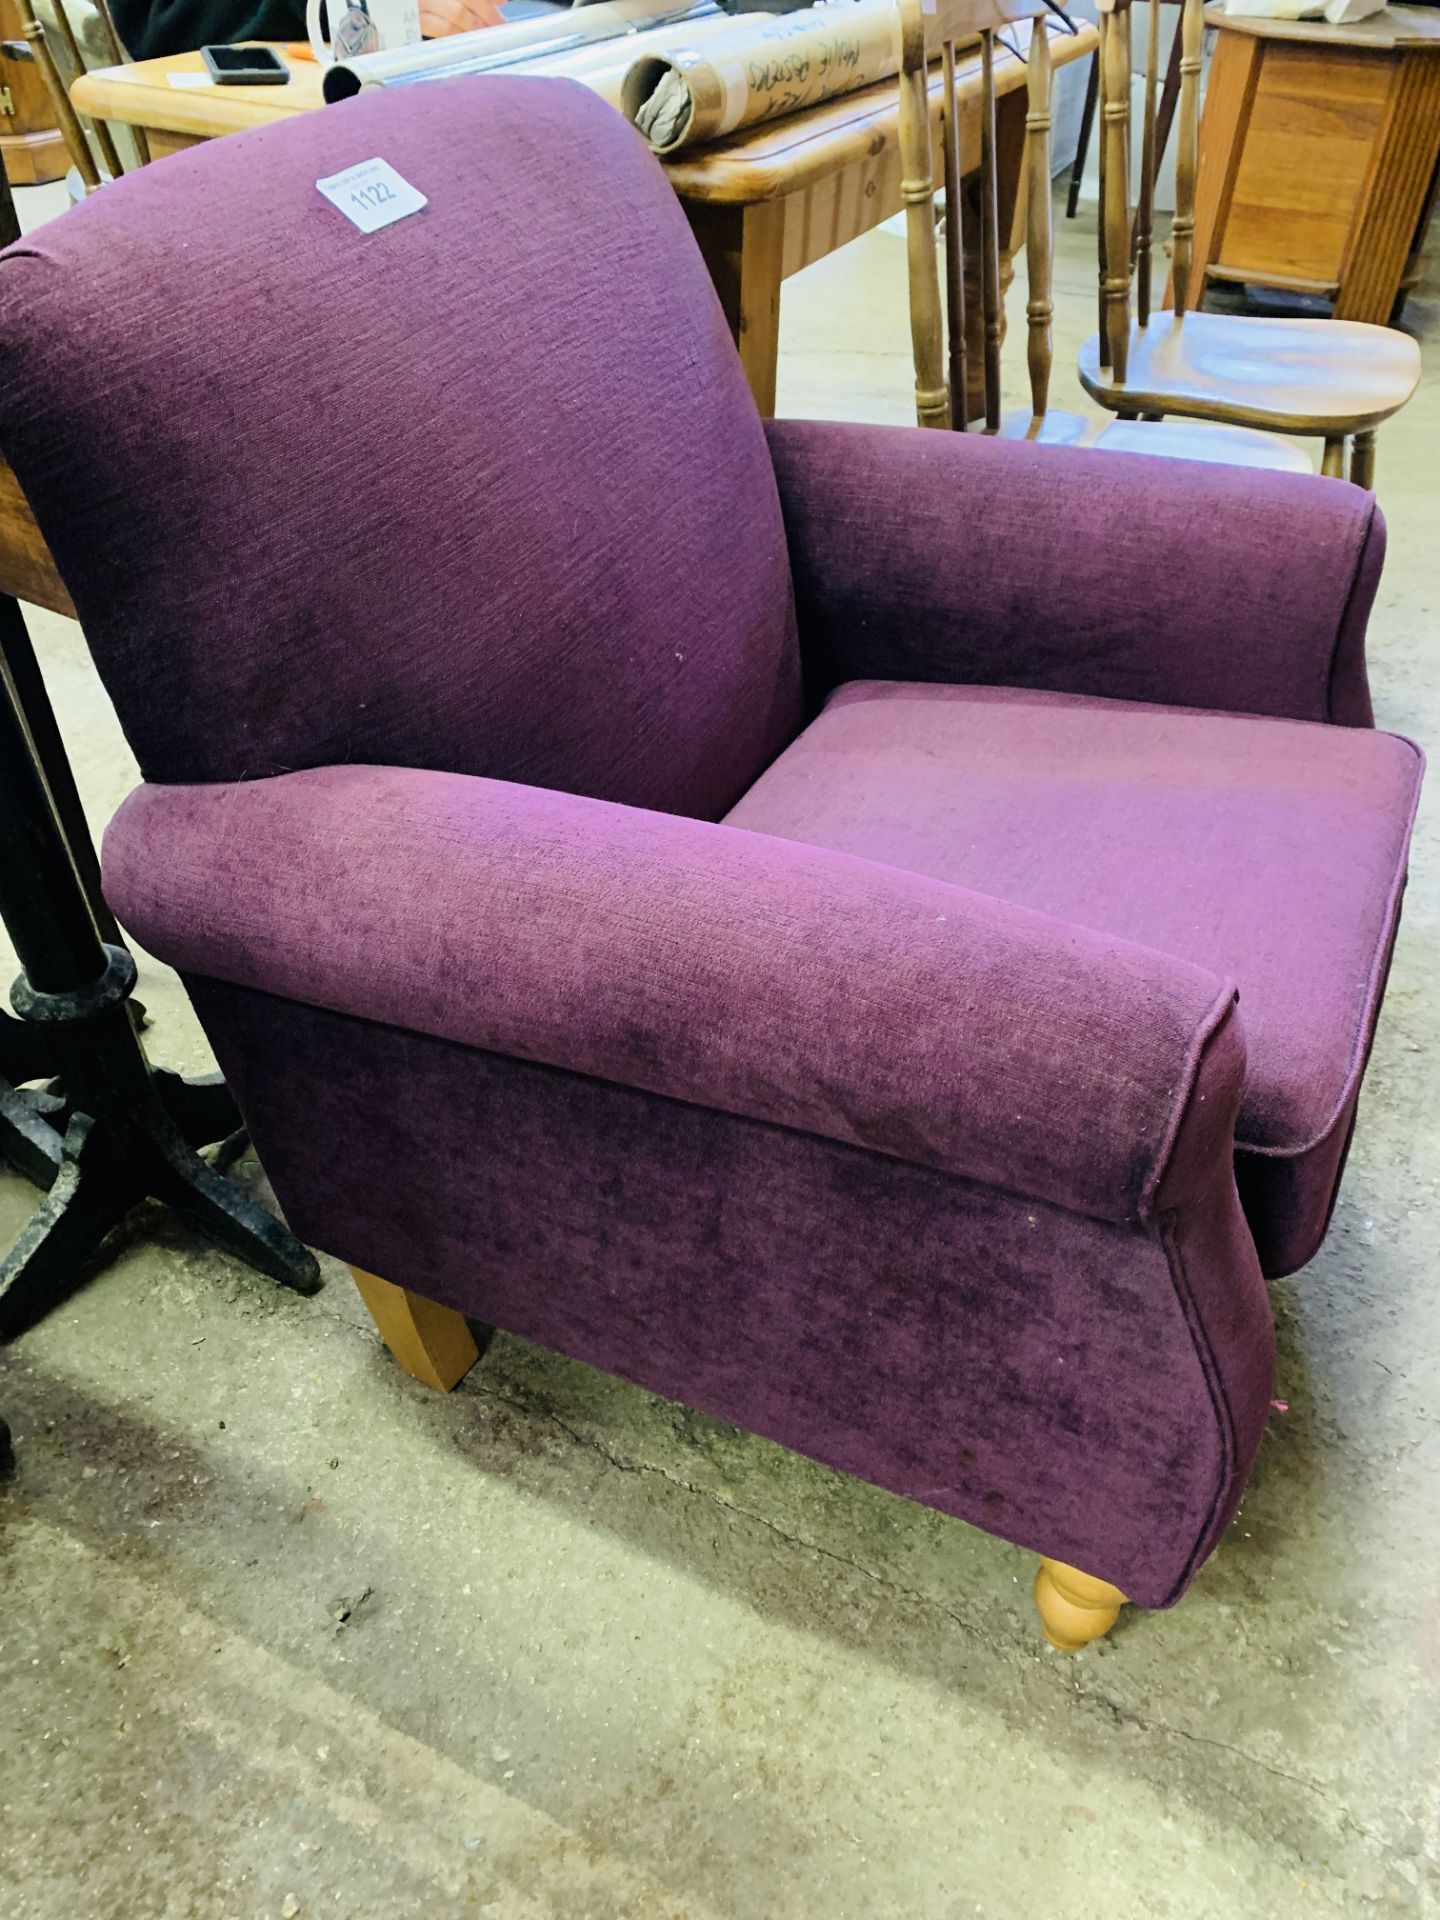 Purple armchair from Next. - Image 3 of 3